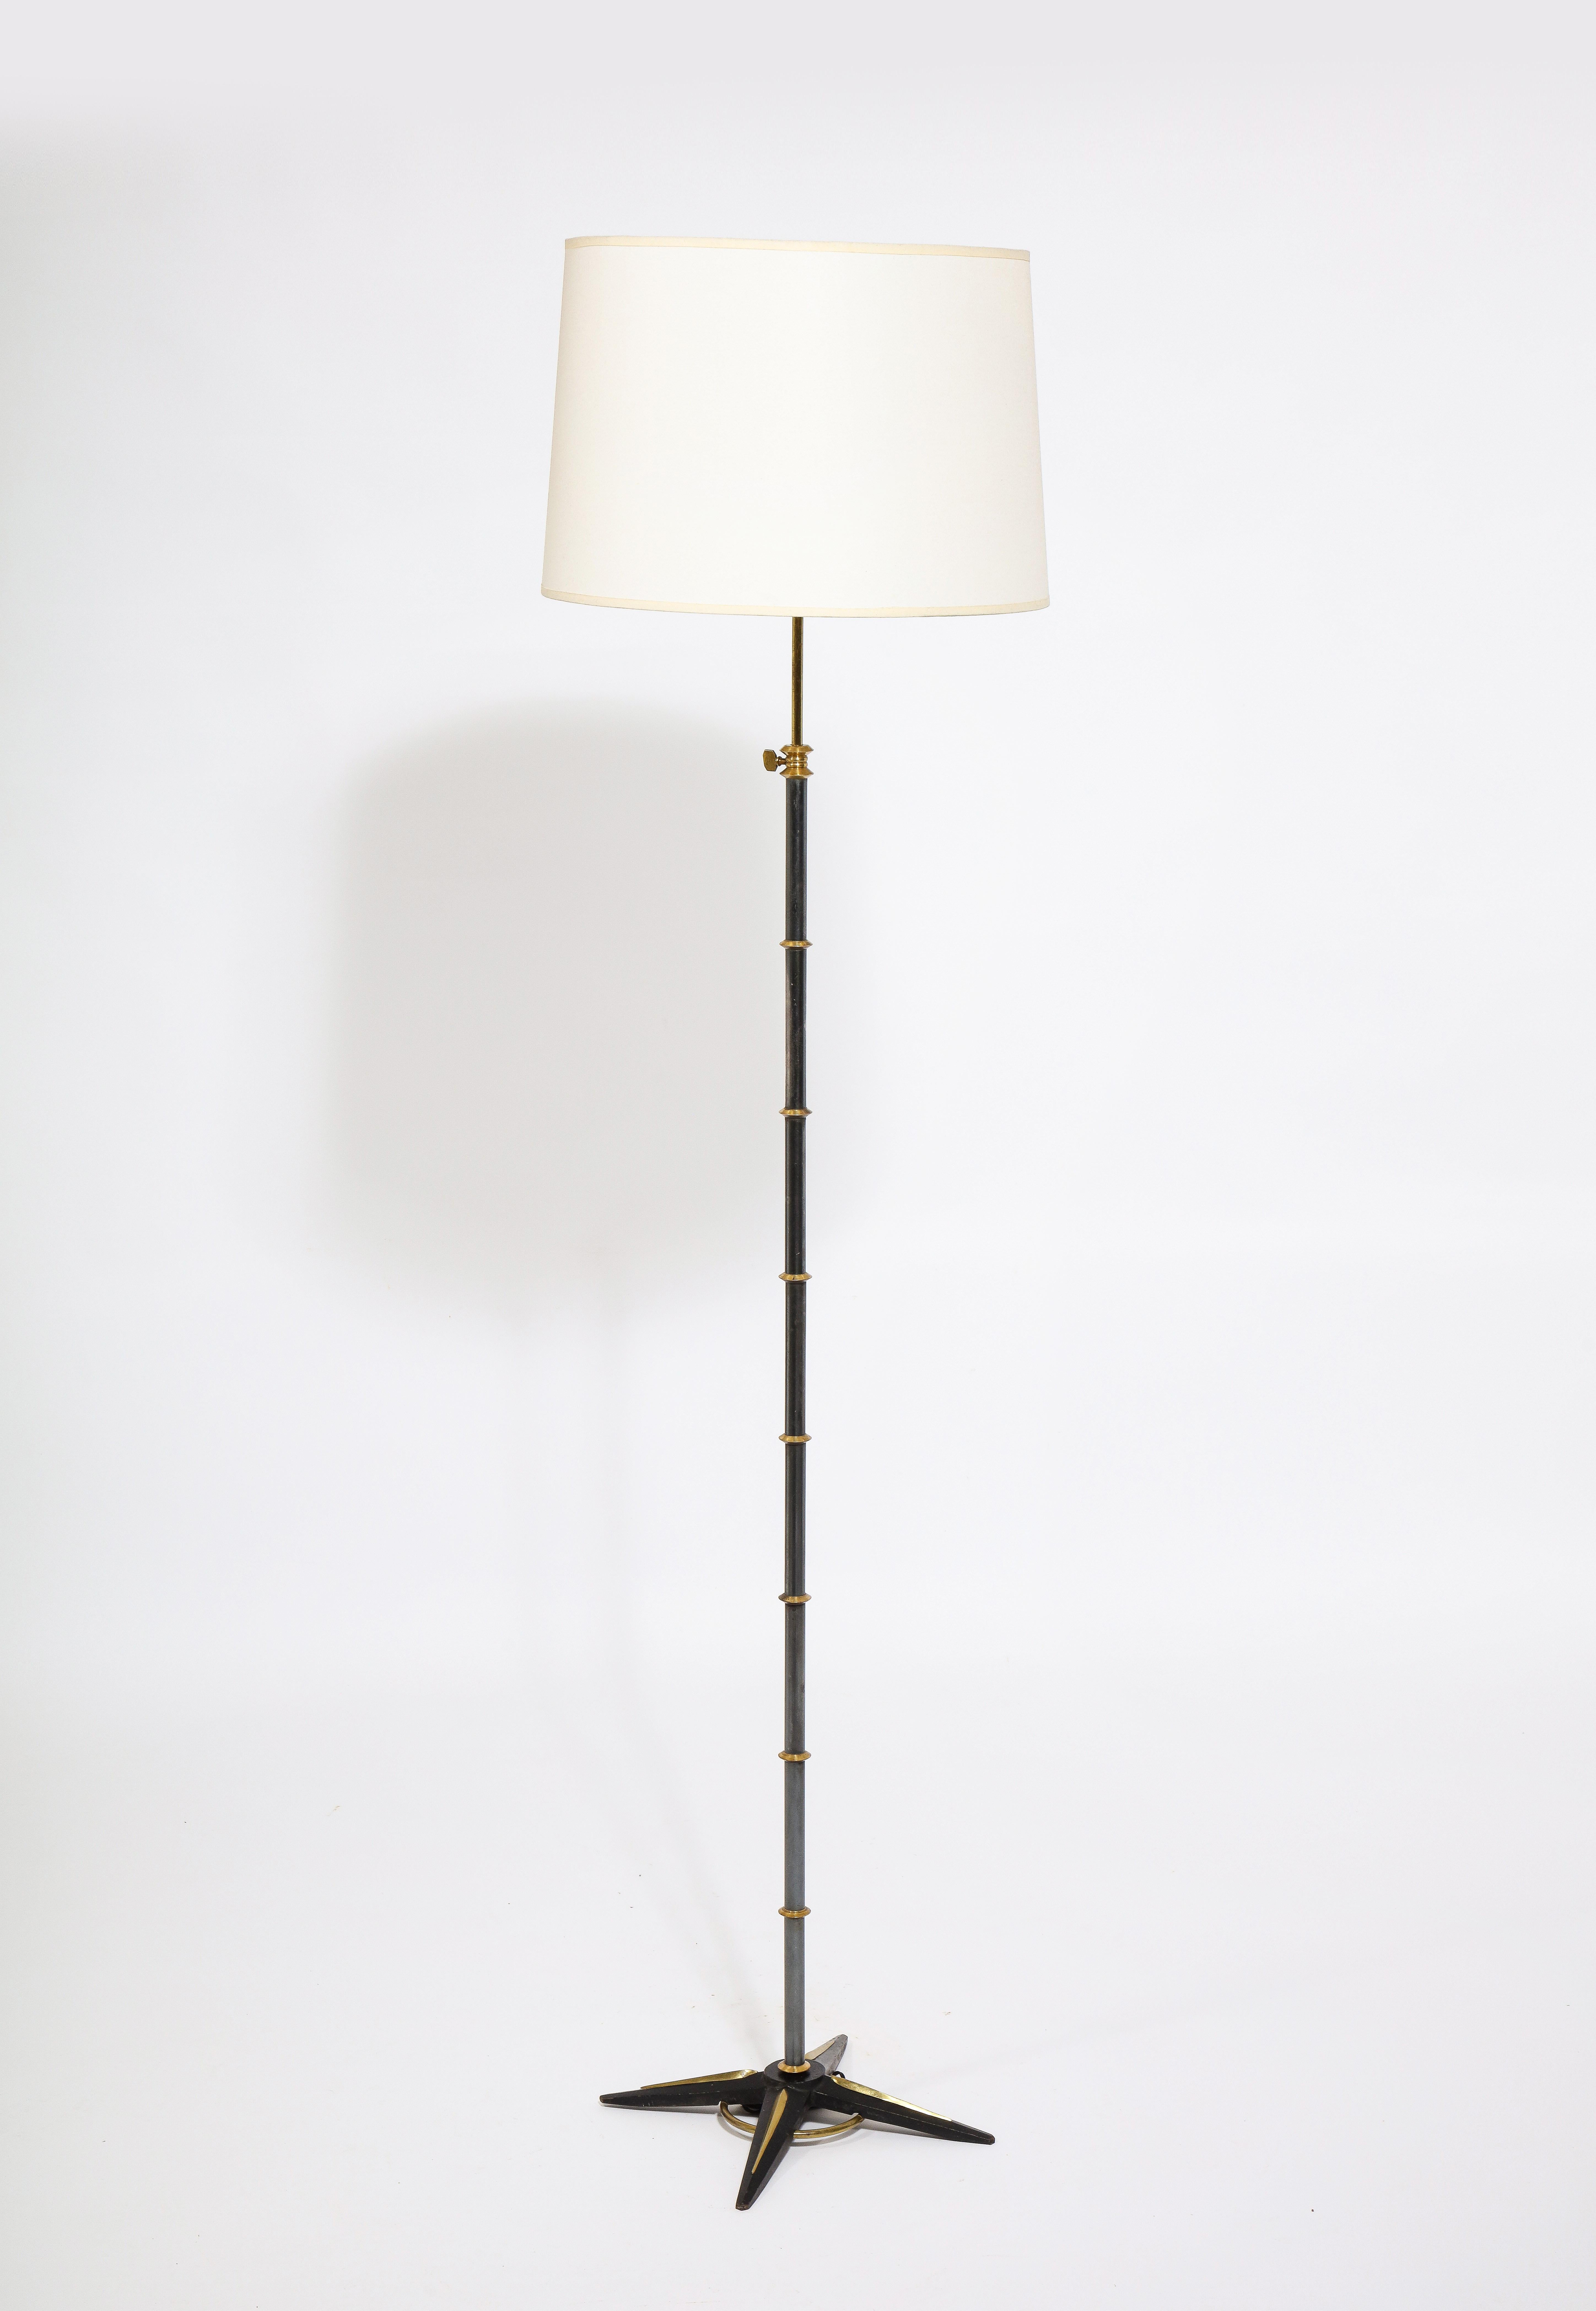 French Brass and Lacquered Steel floor lamp by Jacques Adnet, France 1960's